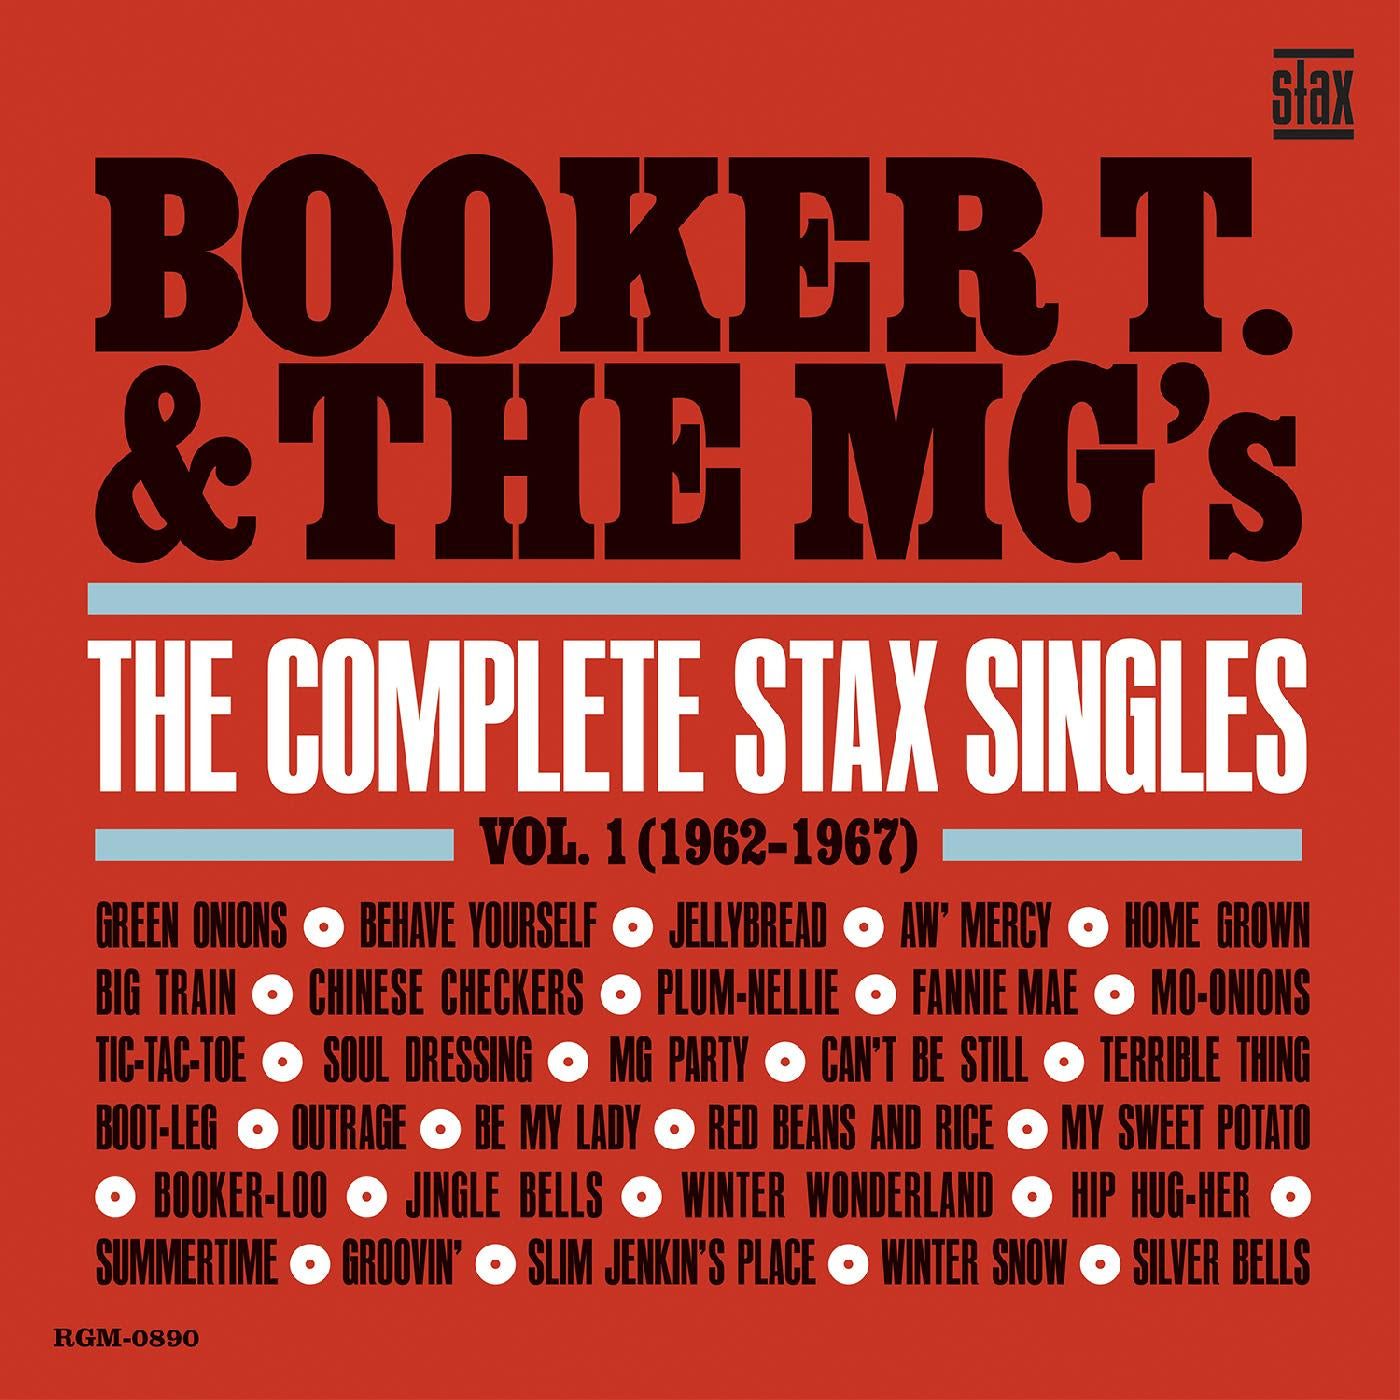 Booker T. & the MG's | The Complete Stax Singles Vol. 1 (1962-1967) (2-LP, Red Vinyl) | Vinyl